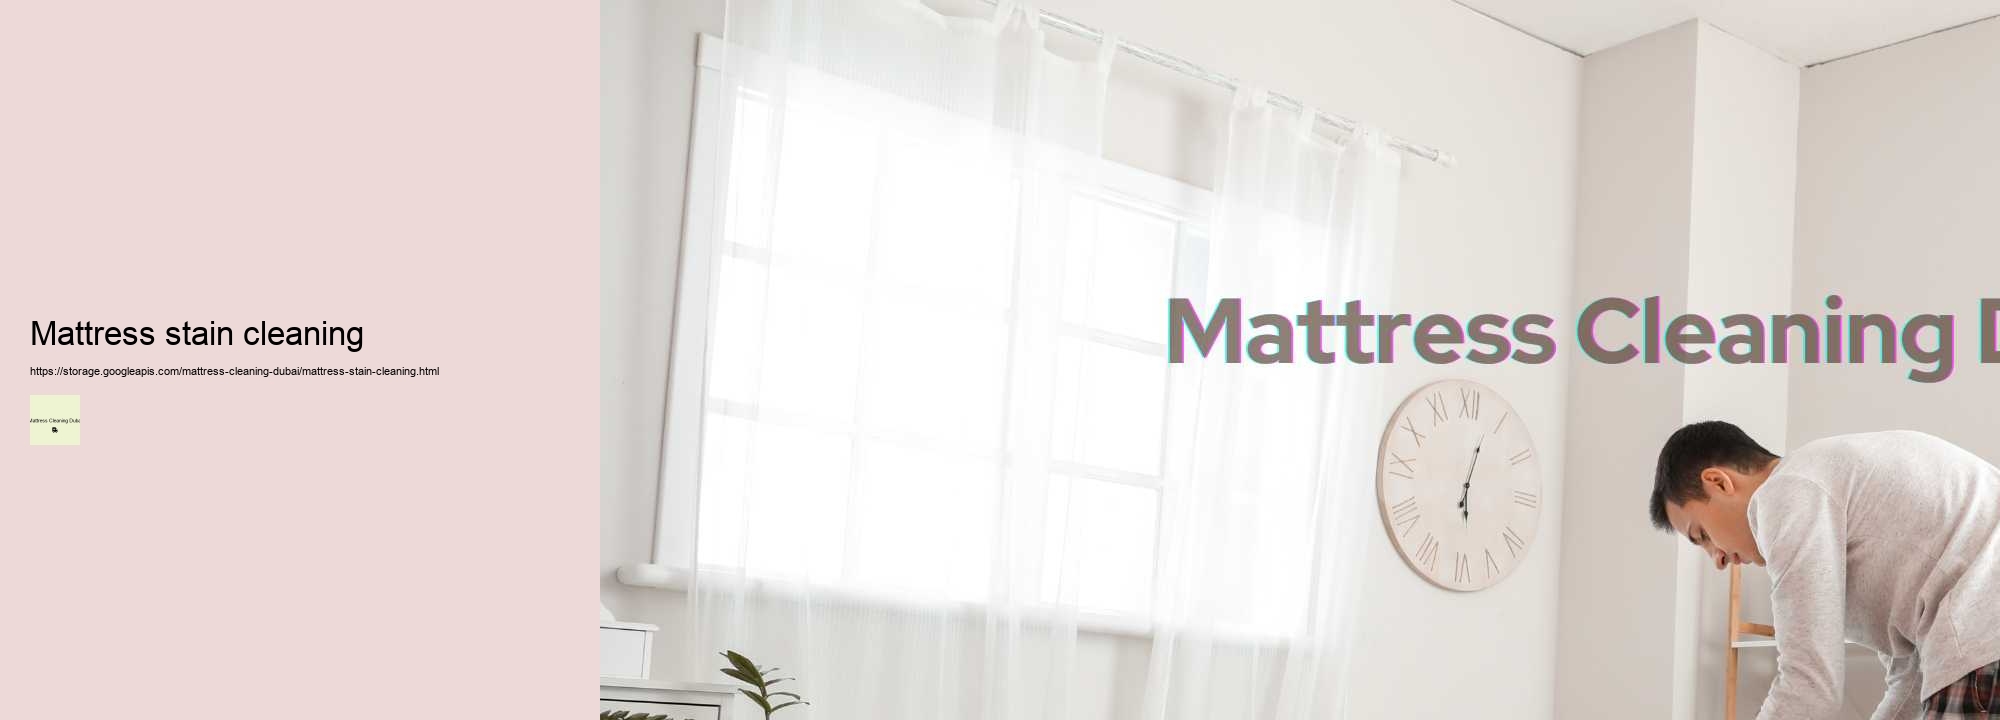 Mattress stain cleaning